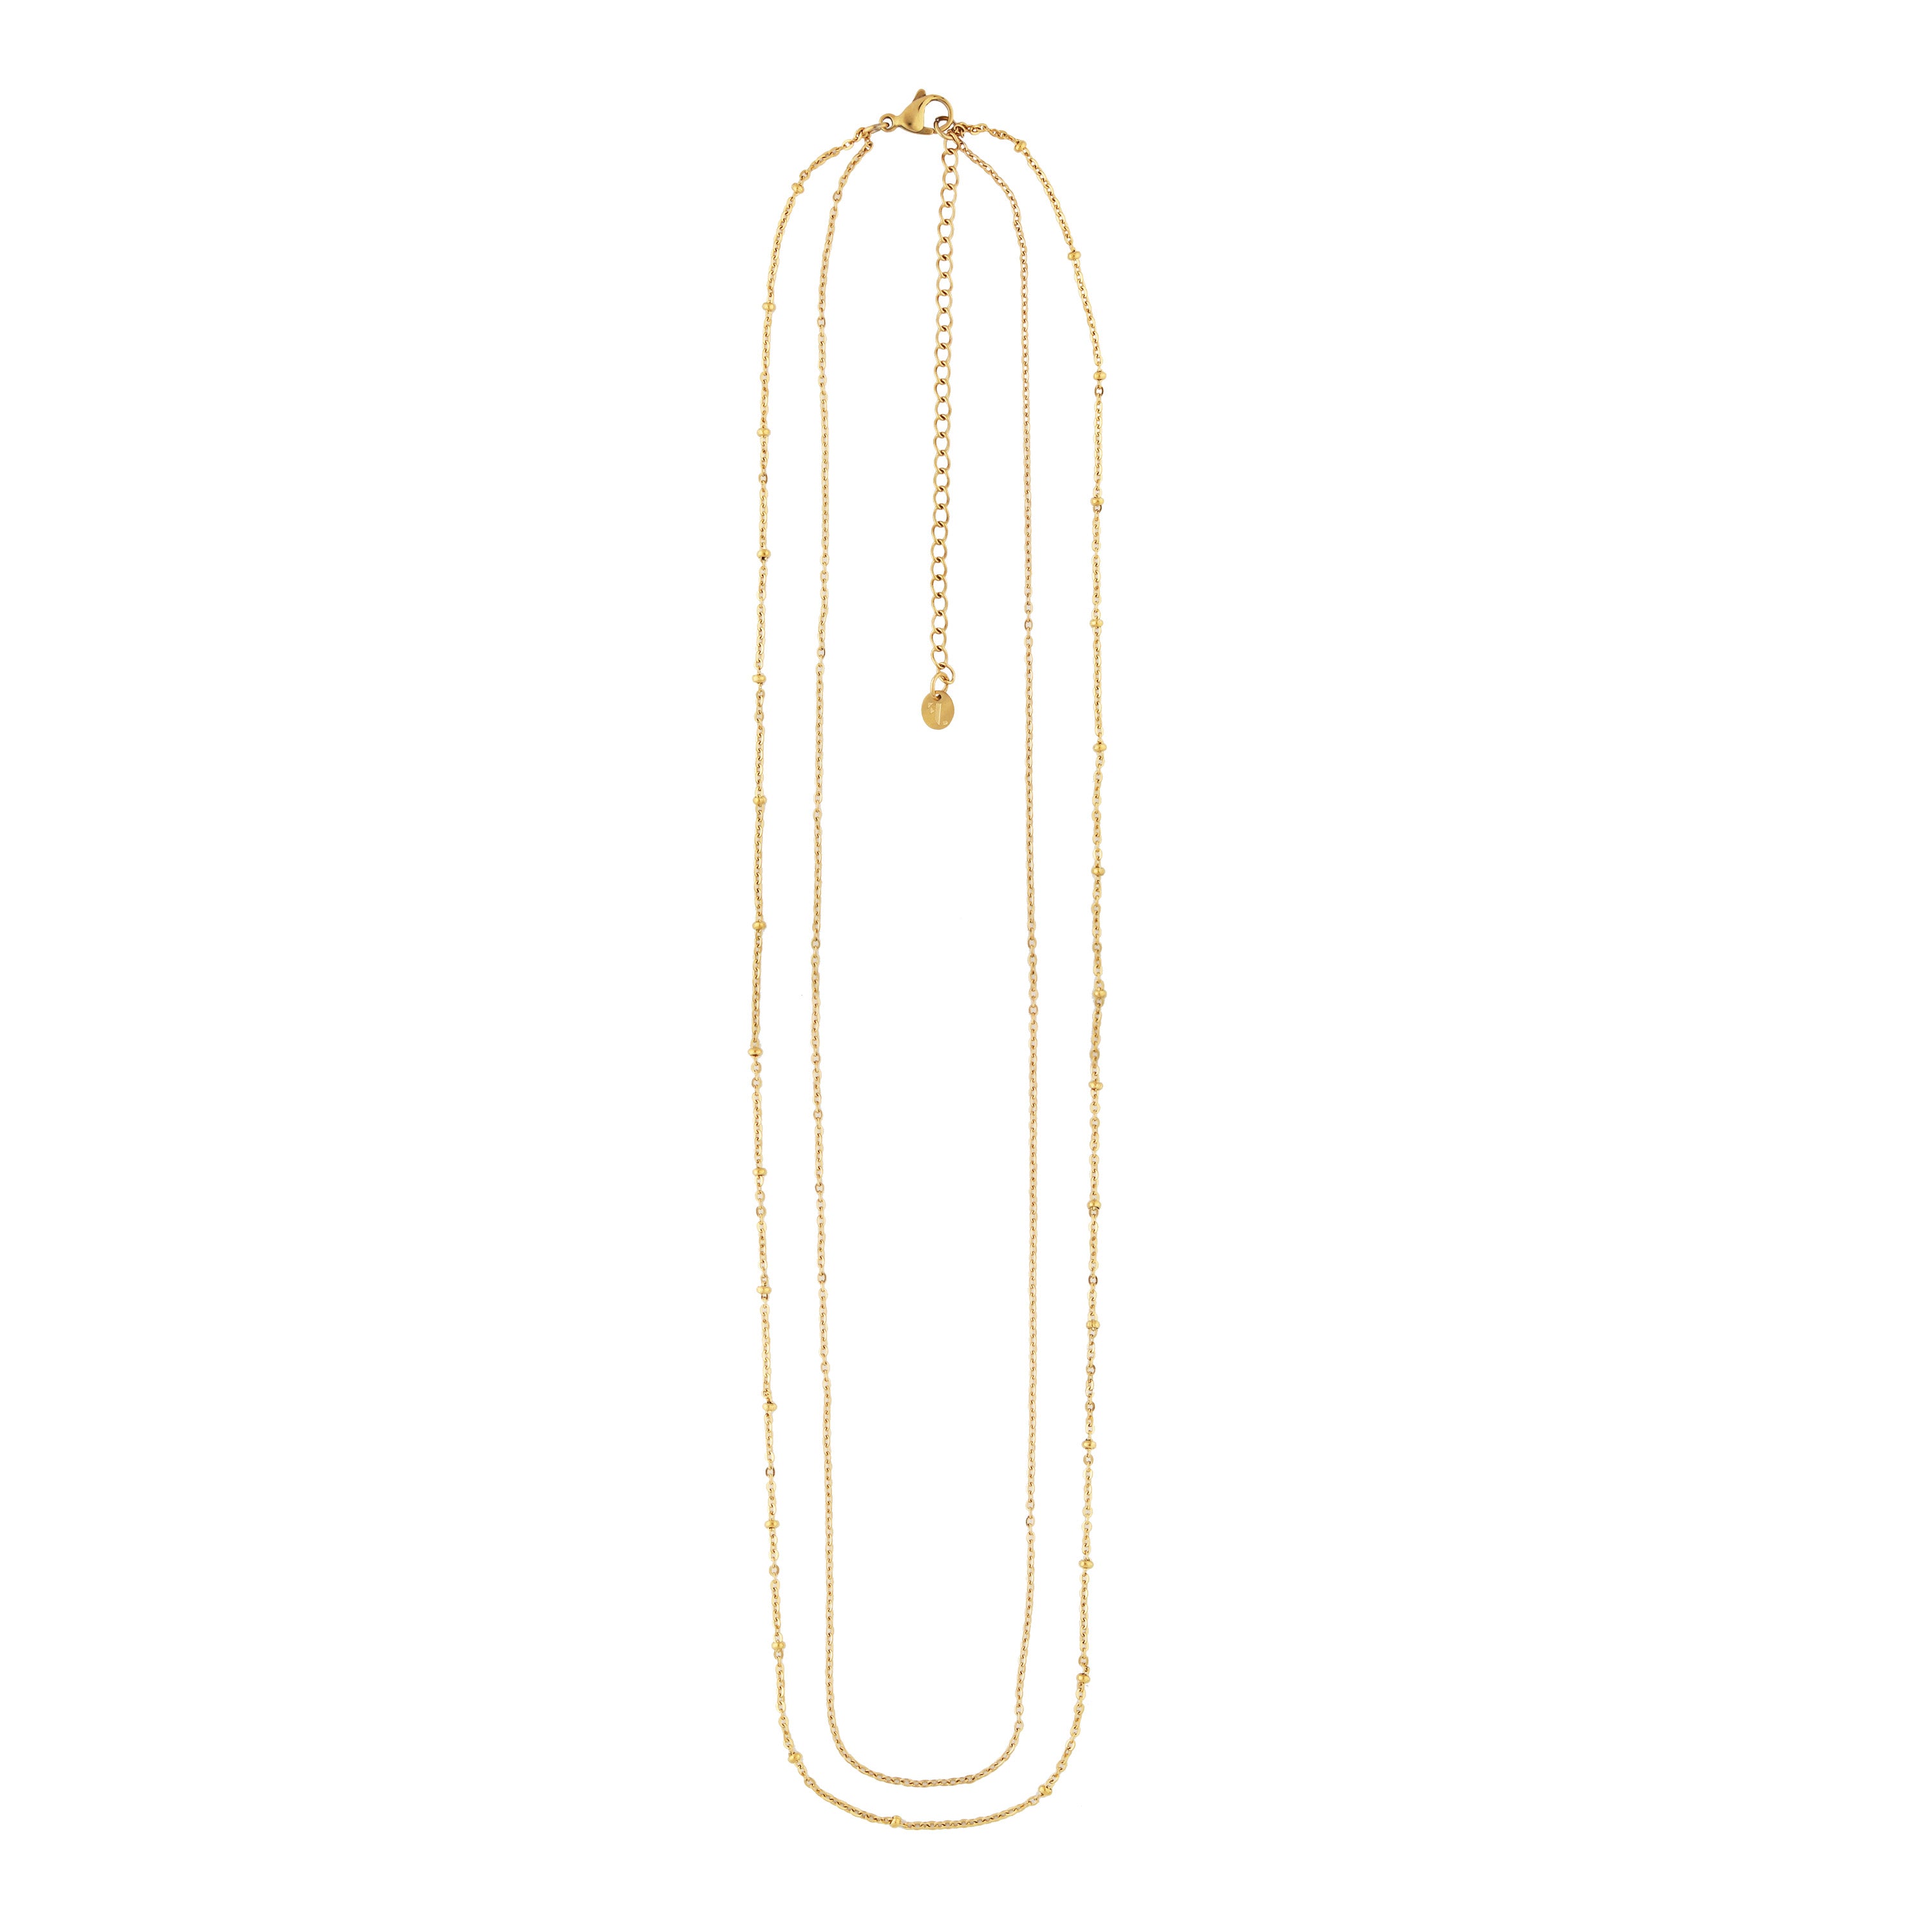 Tavira women's waist chain by Five Jwlry, featuring two layered chains: the first is a thin cable chain and the second is a thin cable chain adorned with a row of beads. Adjustable in size from 68cm to 86cm, in gold-colored, water-resistant 316L stainless steel. Hypoallergenic with a 2-year warranty.